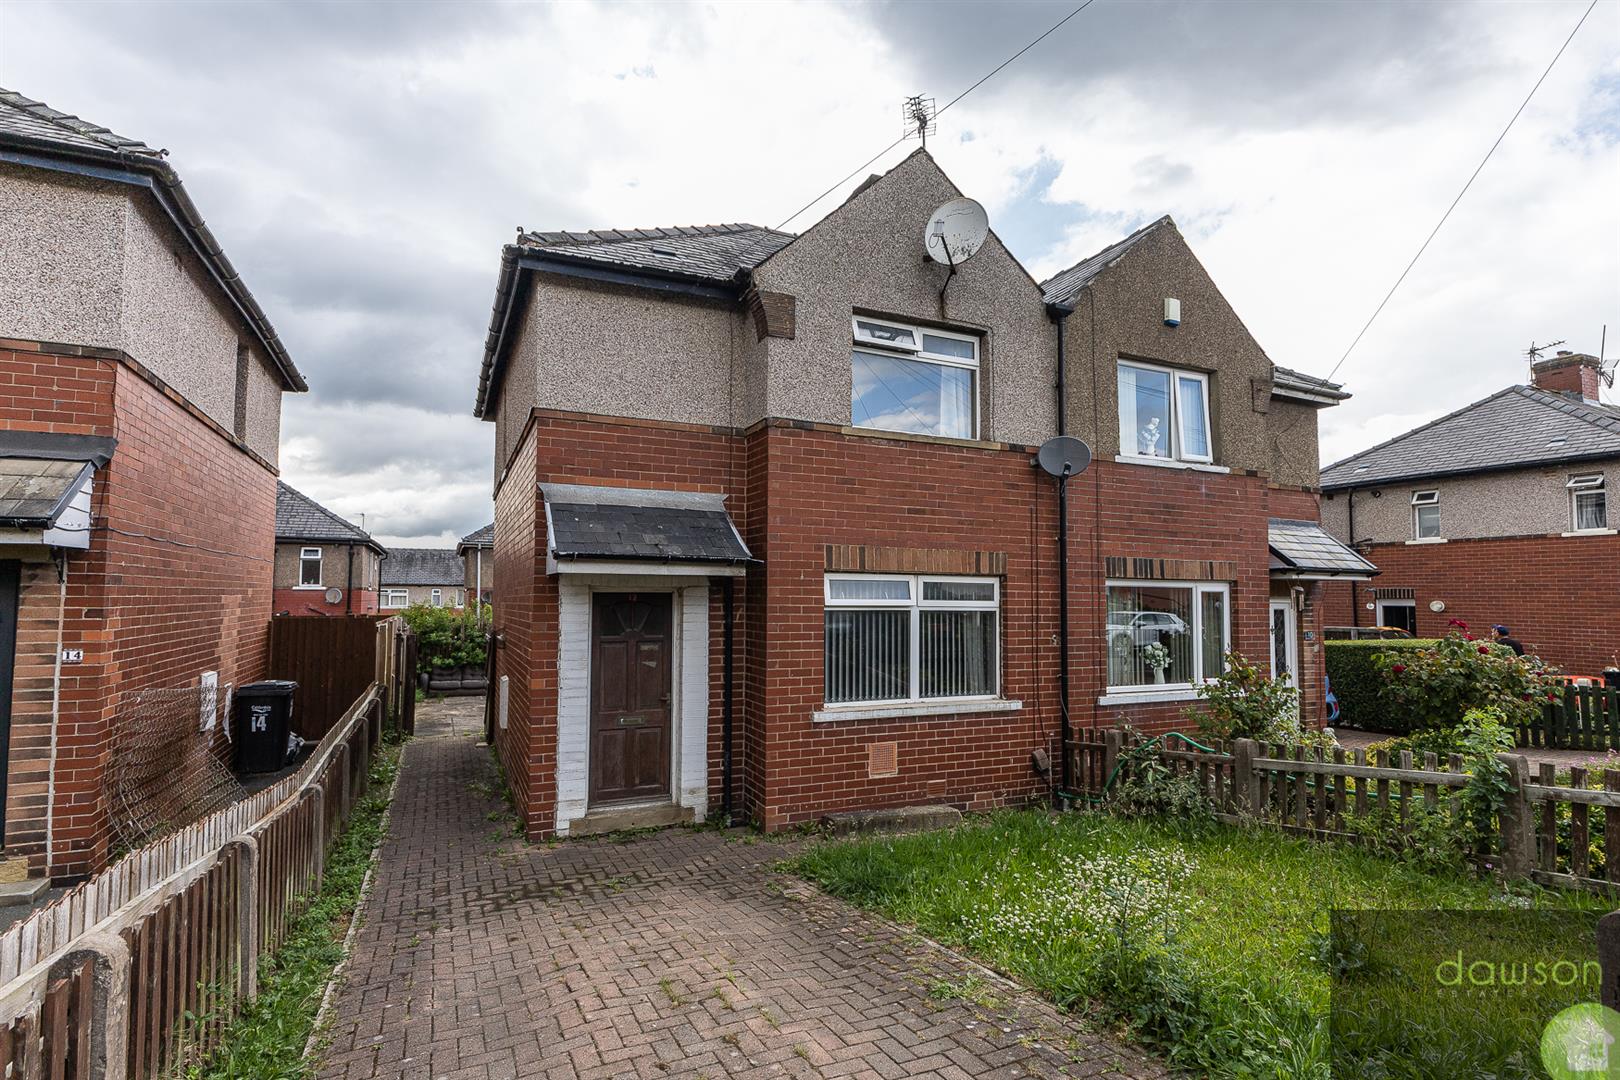 2 bed semi-detached house for sale in Backhold Avenue, Halifax, HX3 